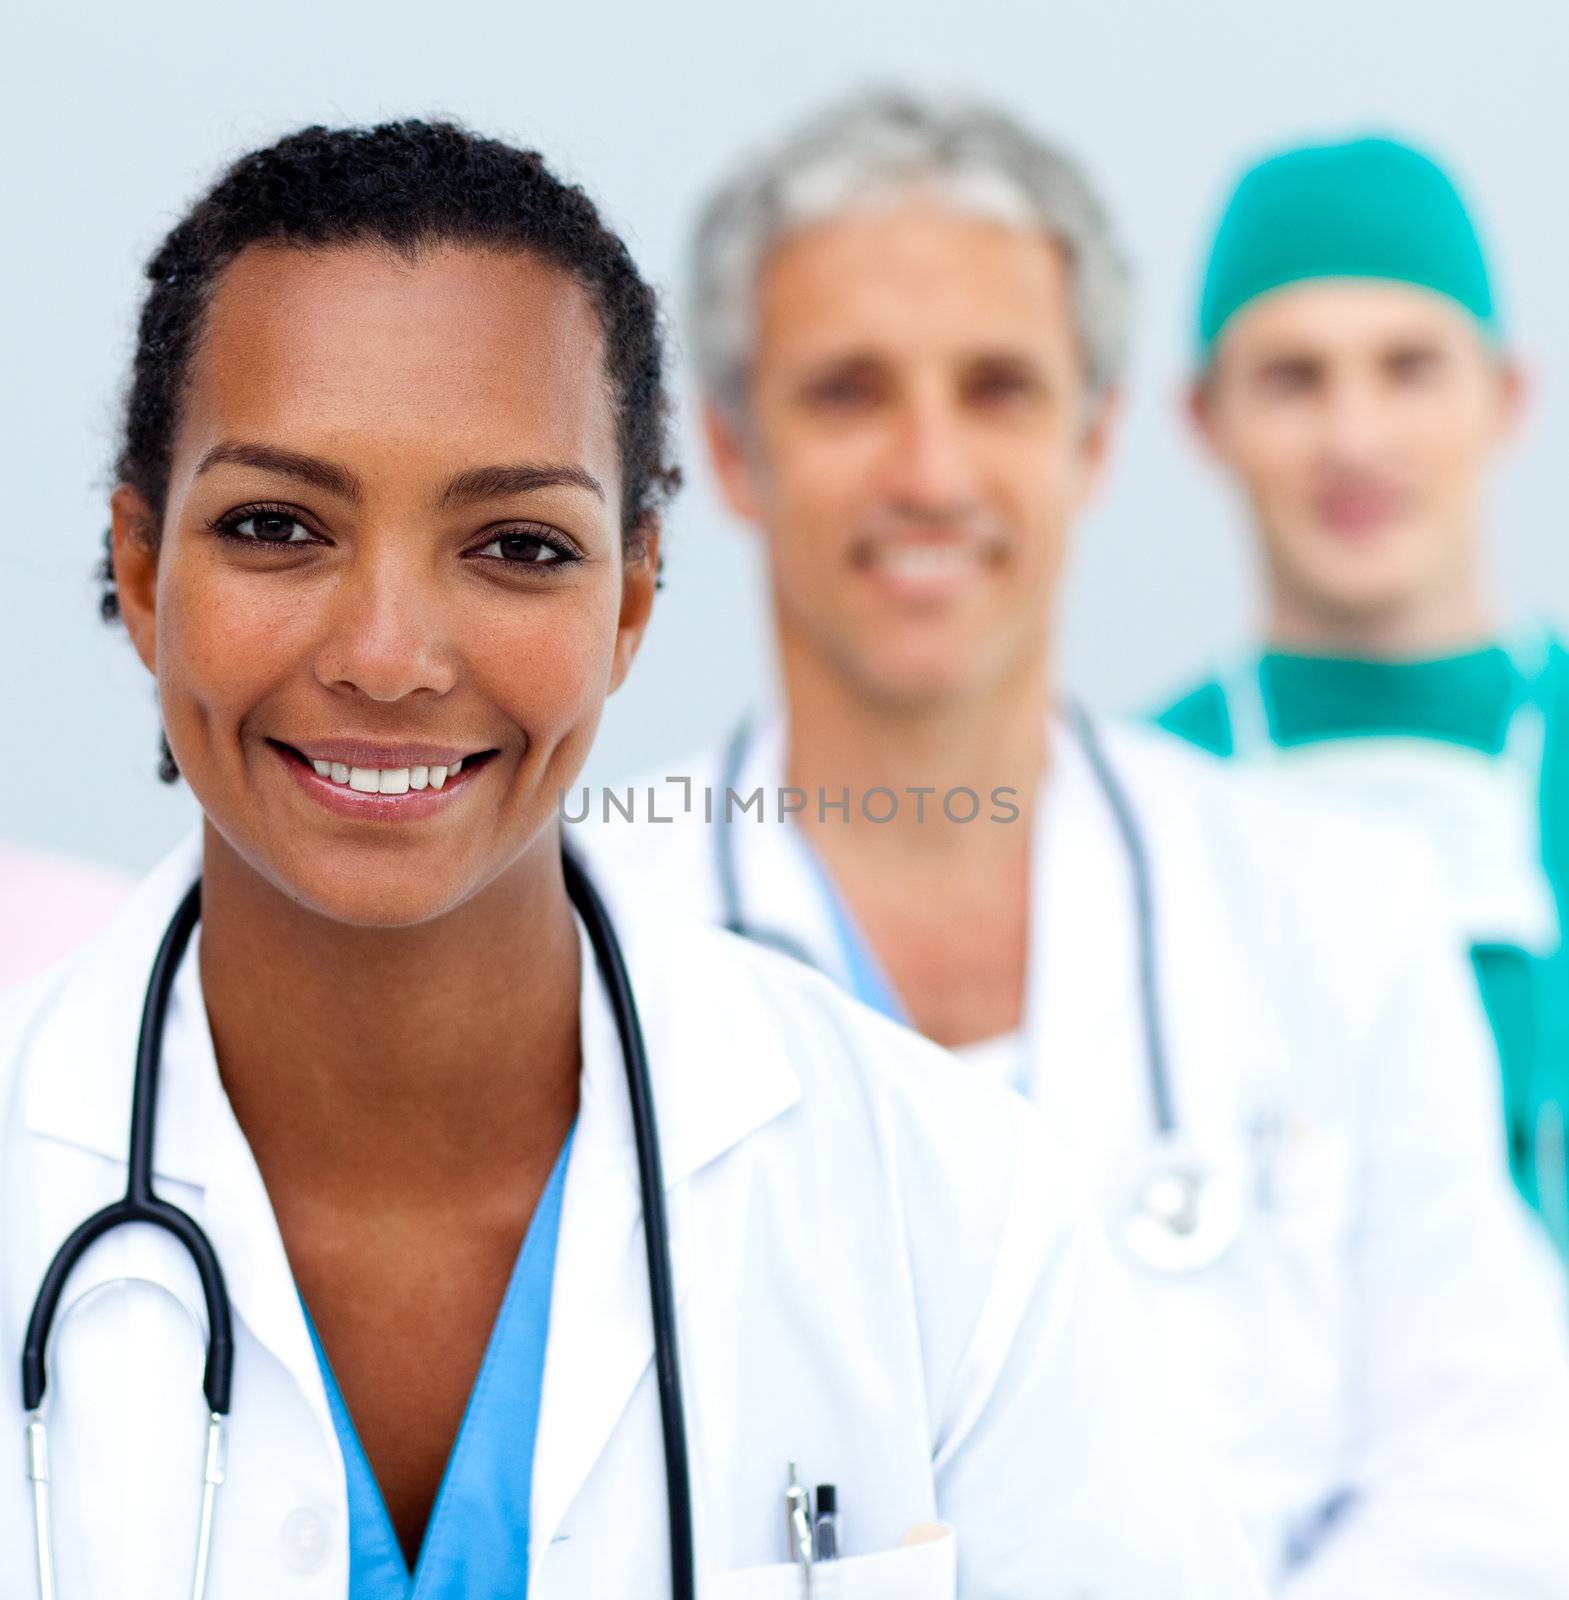 Attractive female Doctor standing before her team